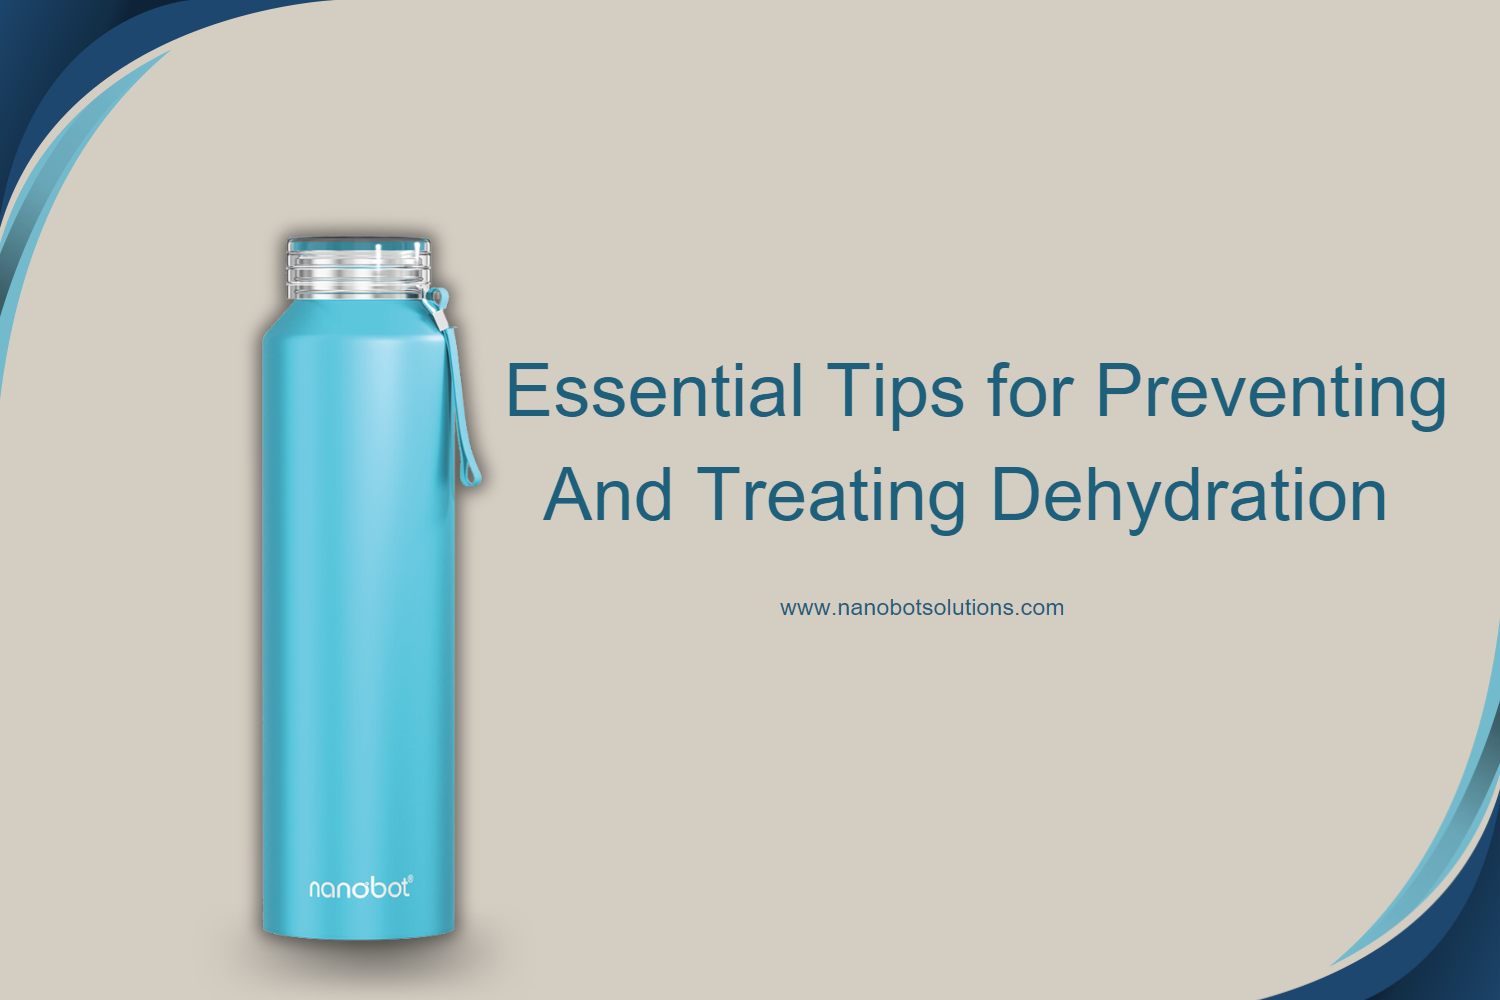 Essential Tips for Preventing and Treating Dehydration